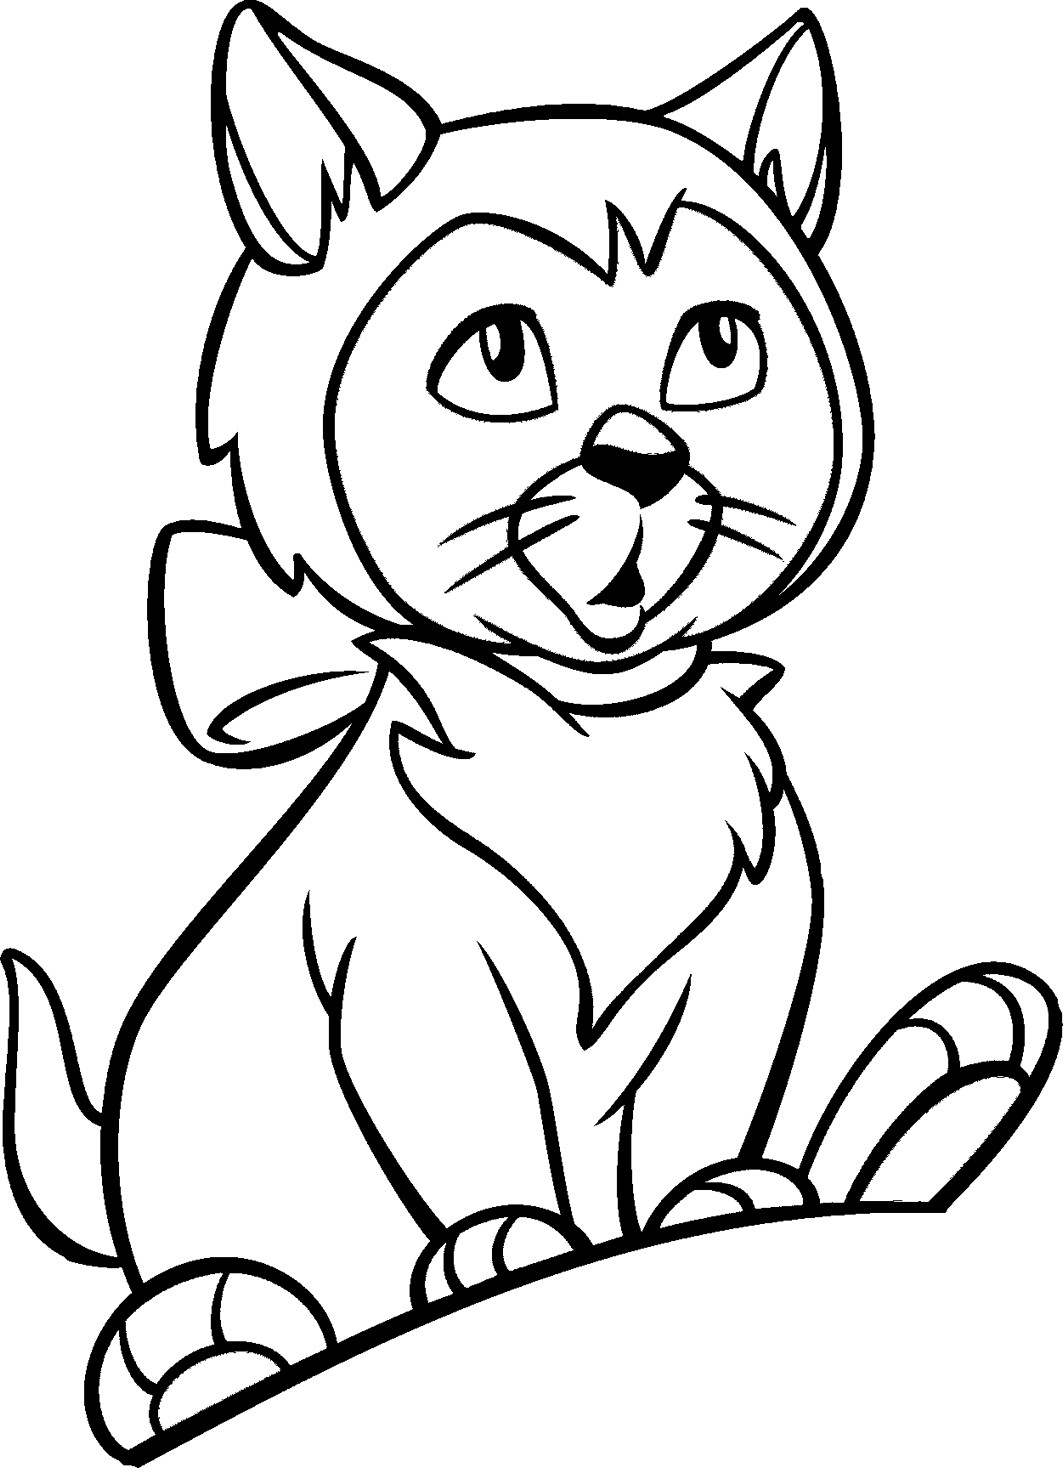 Cat Coloring Pages For Toddlers
 Coloring Pages for Kids Cat Coloring Pages for Kids